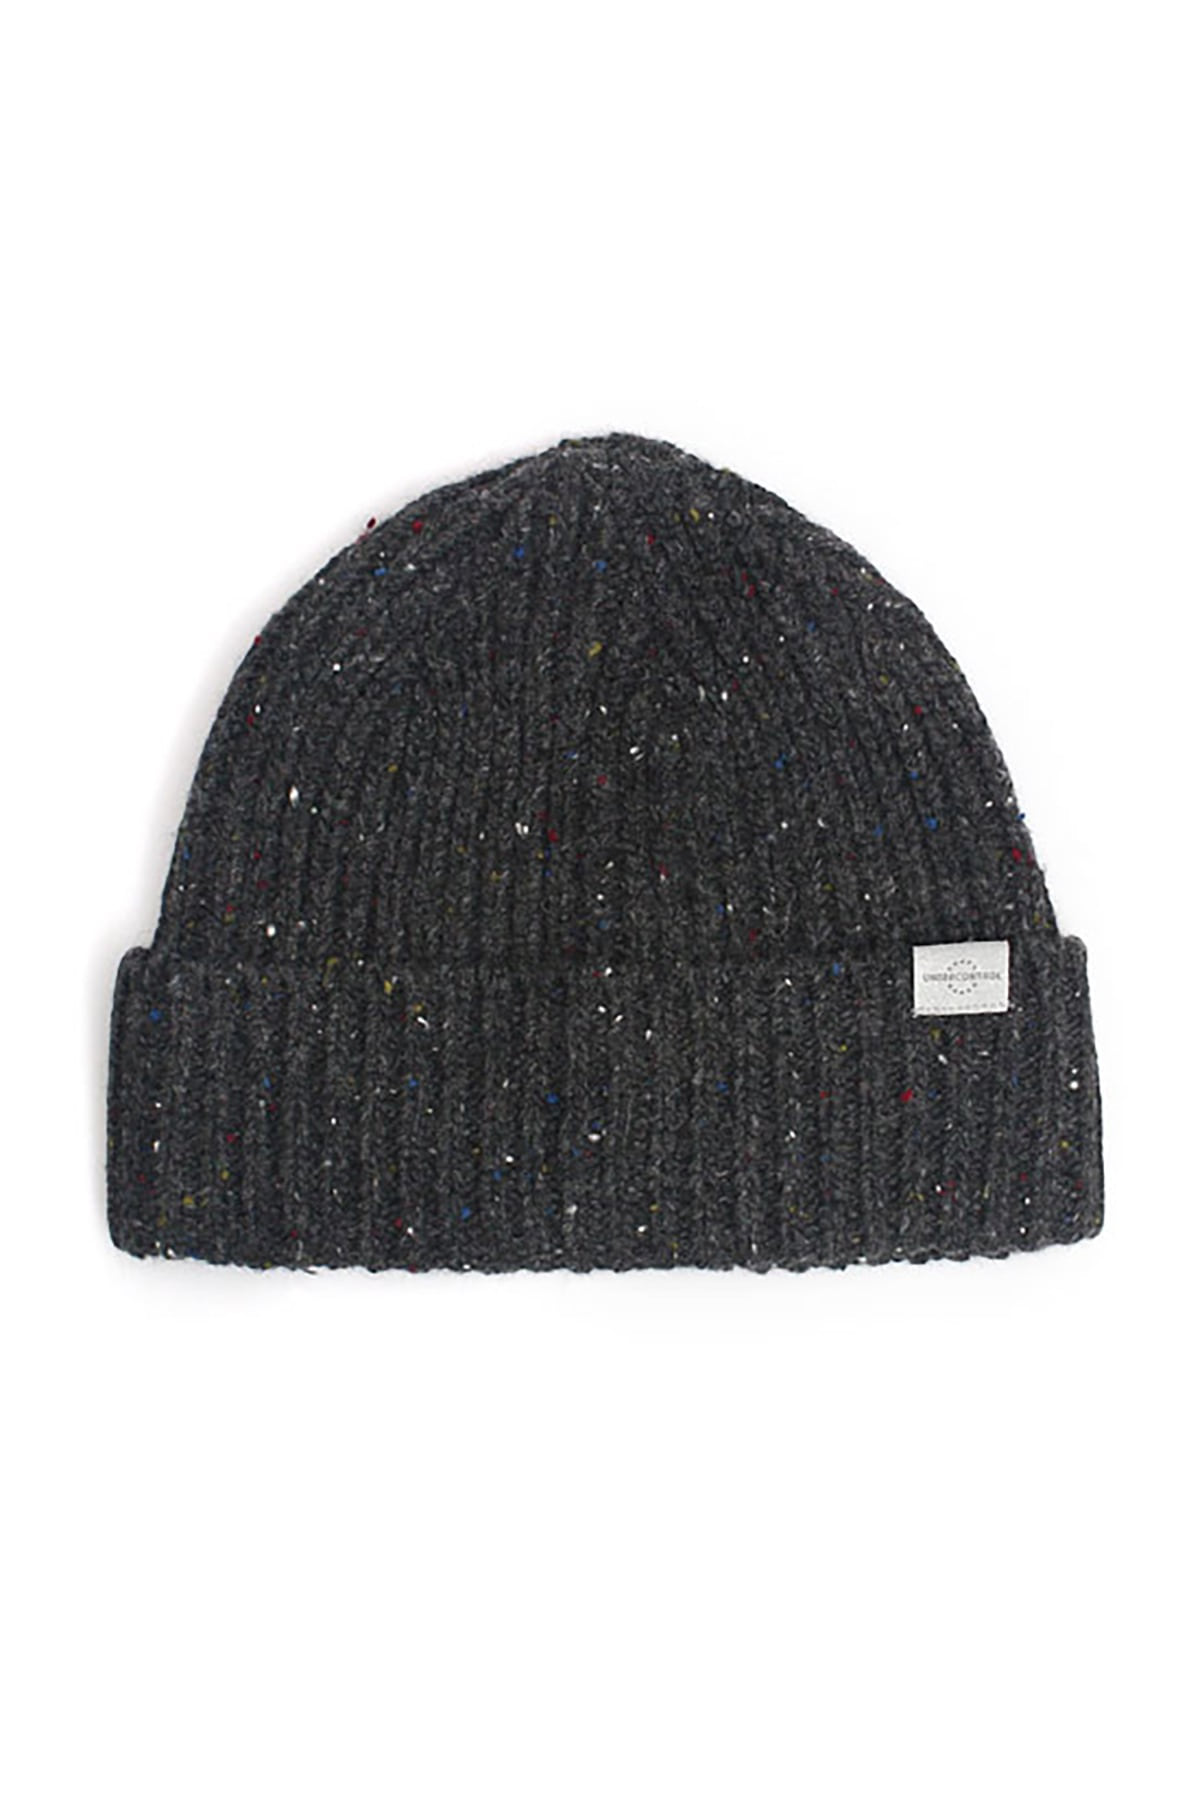 BEANIE / BOLD FIT / WOOL / NEP CHARCOAL (BOX PACKAGE)